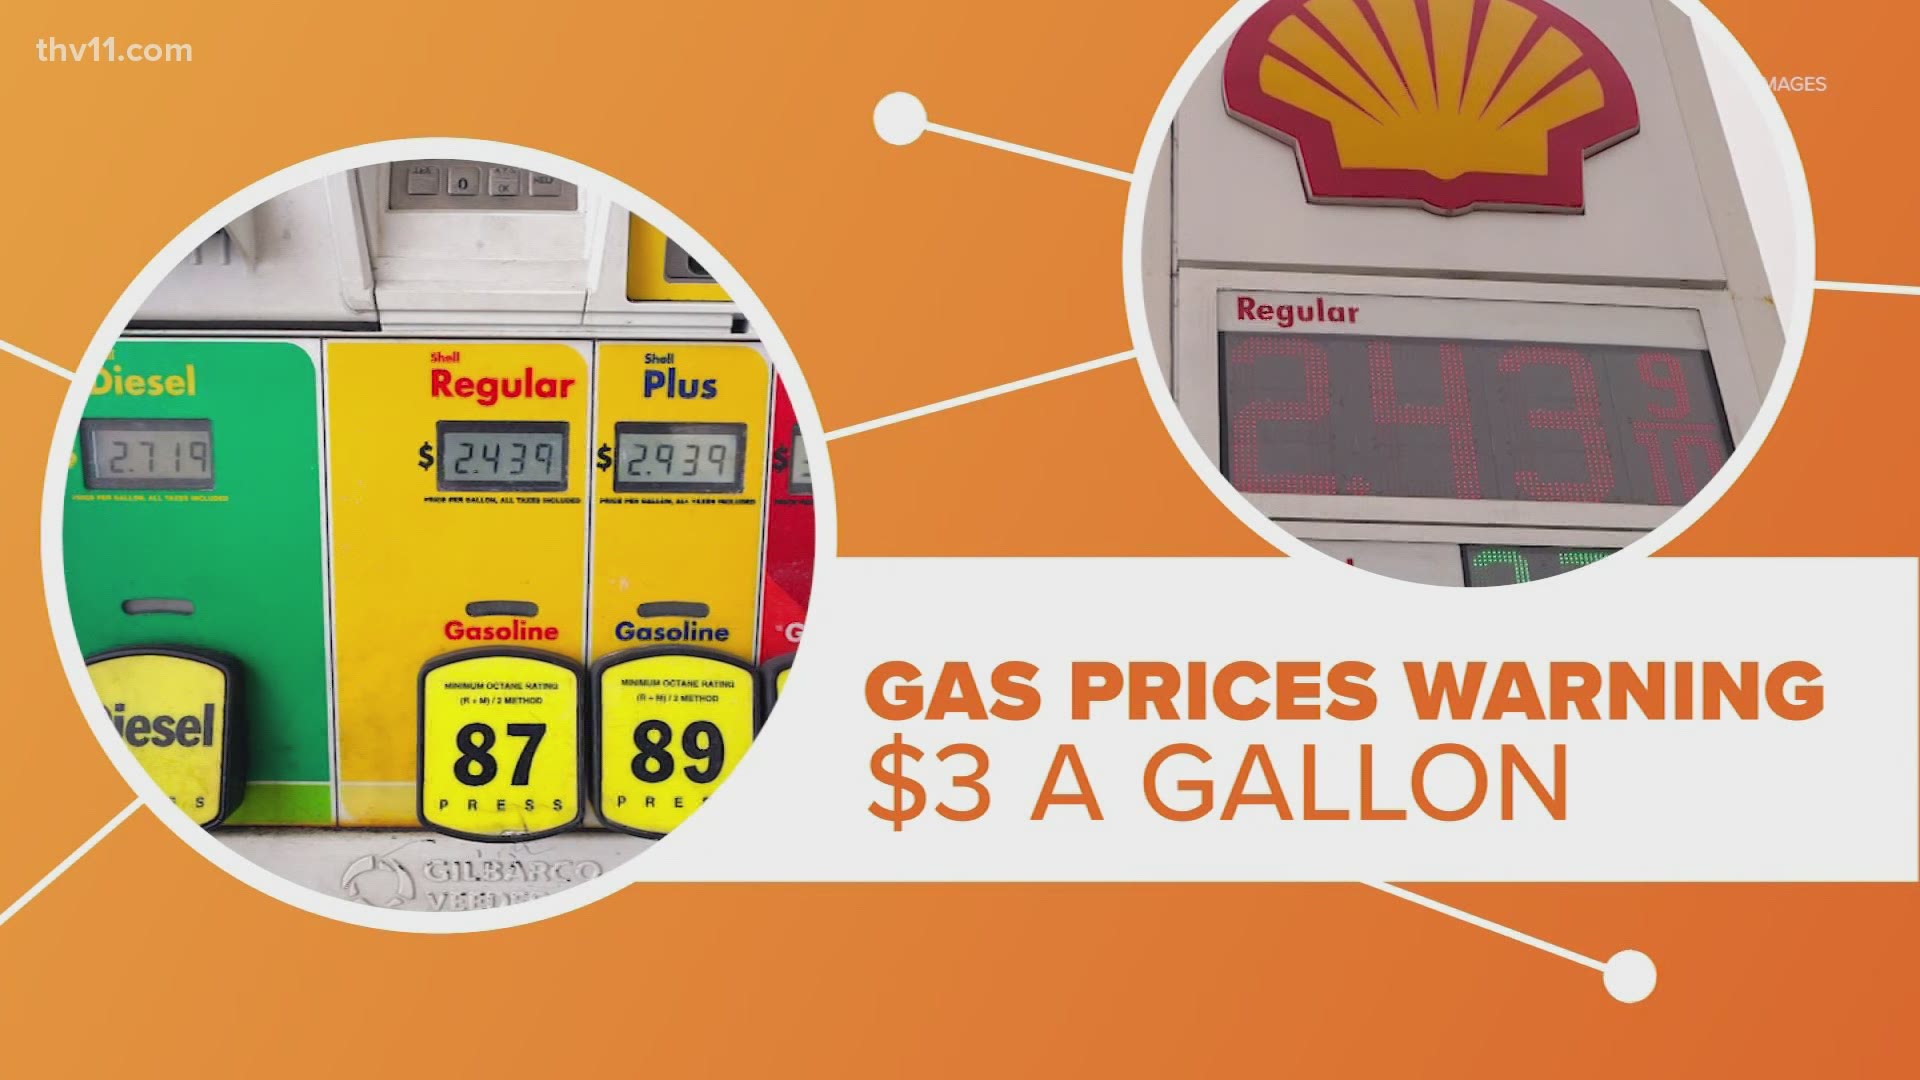 This morning, we're taking a closer look at gas prices. Some stations in Arkansas are already approaching $3 a gallon.